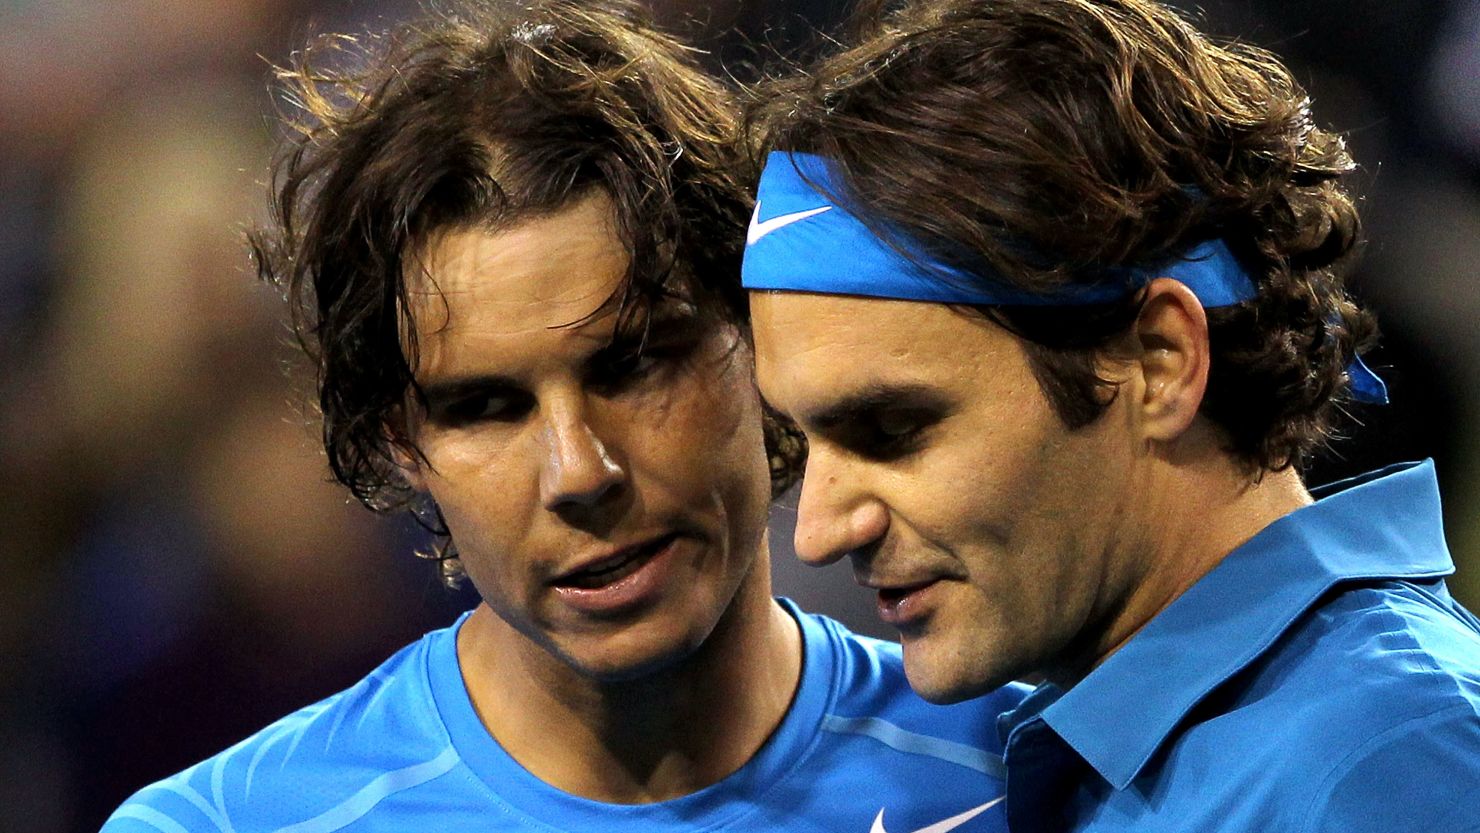 Rafael Nadal could go head to head again with Roger Federer as the Spaniard returns to hard court action in California.